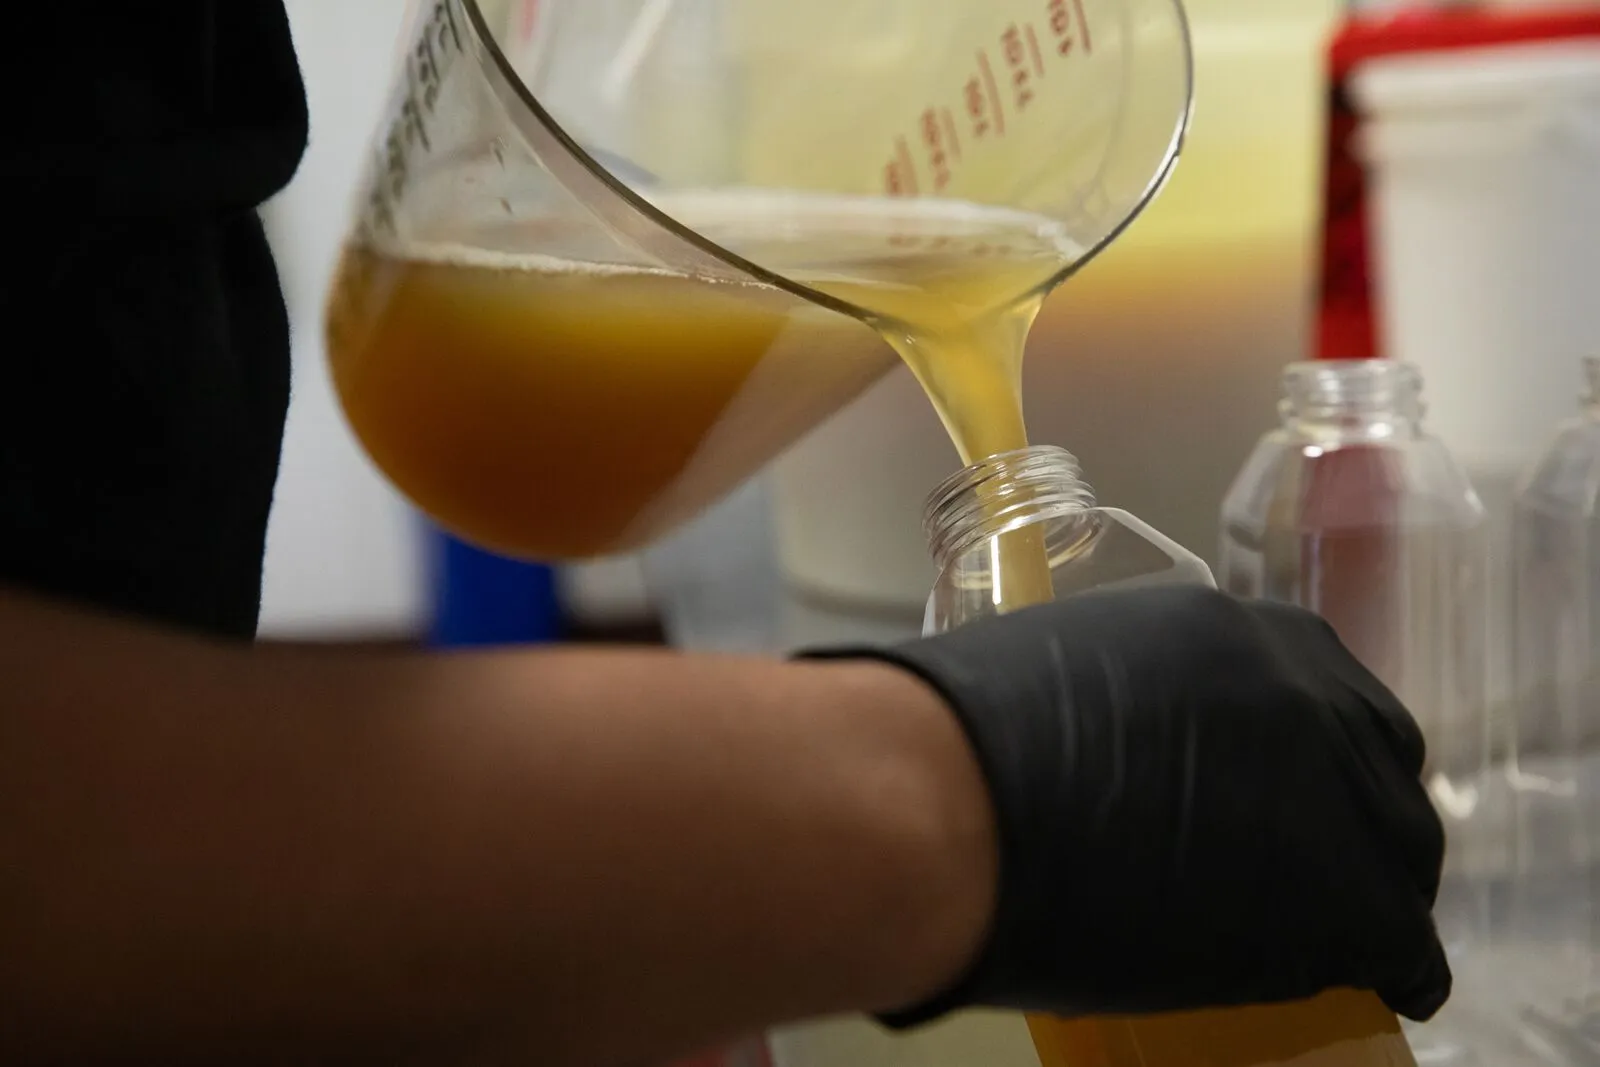 Closeup of a someone's hands pouring a large measuring cup of golden liquid into a glass bottle.